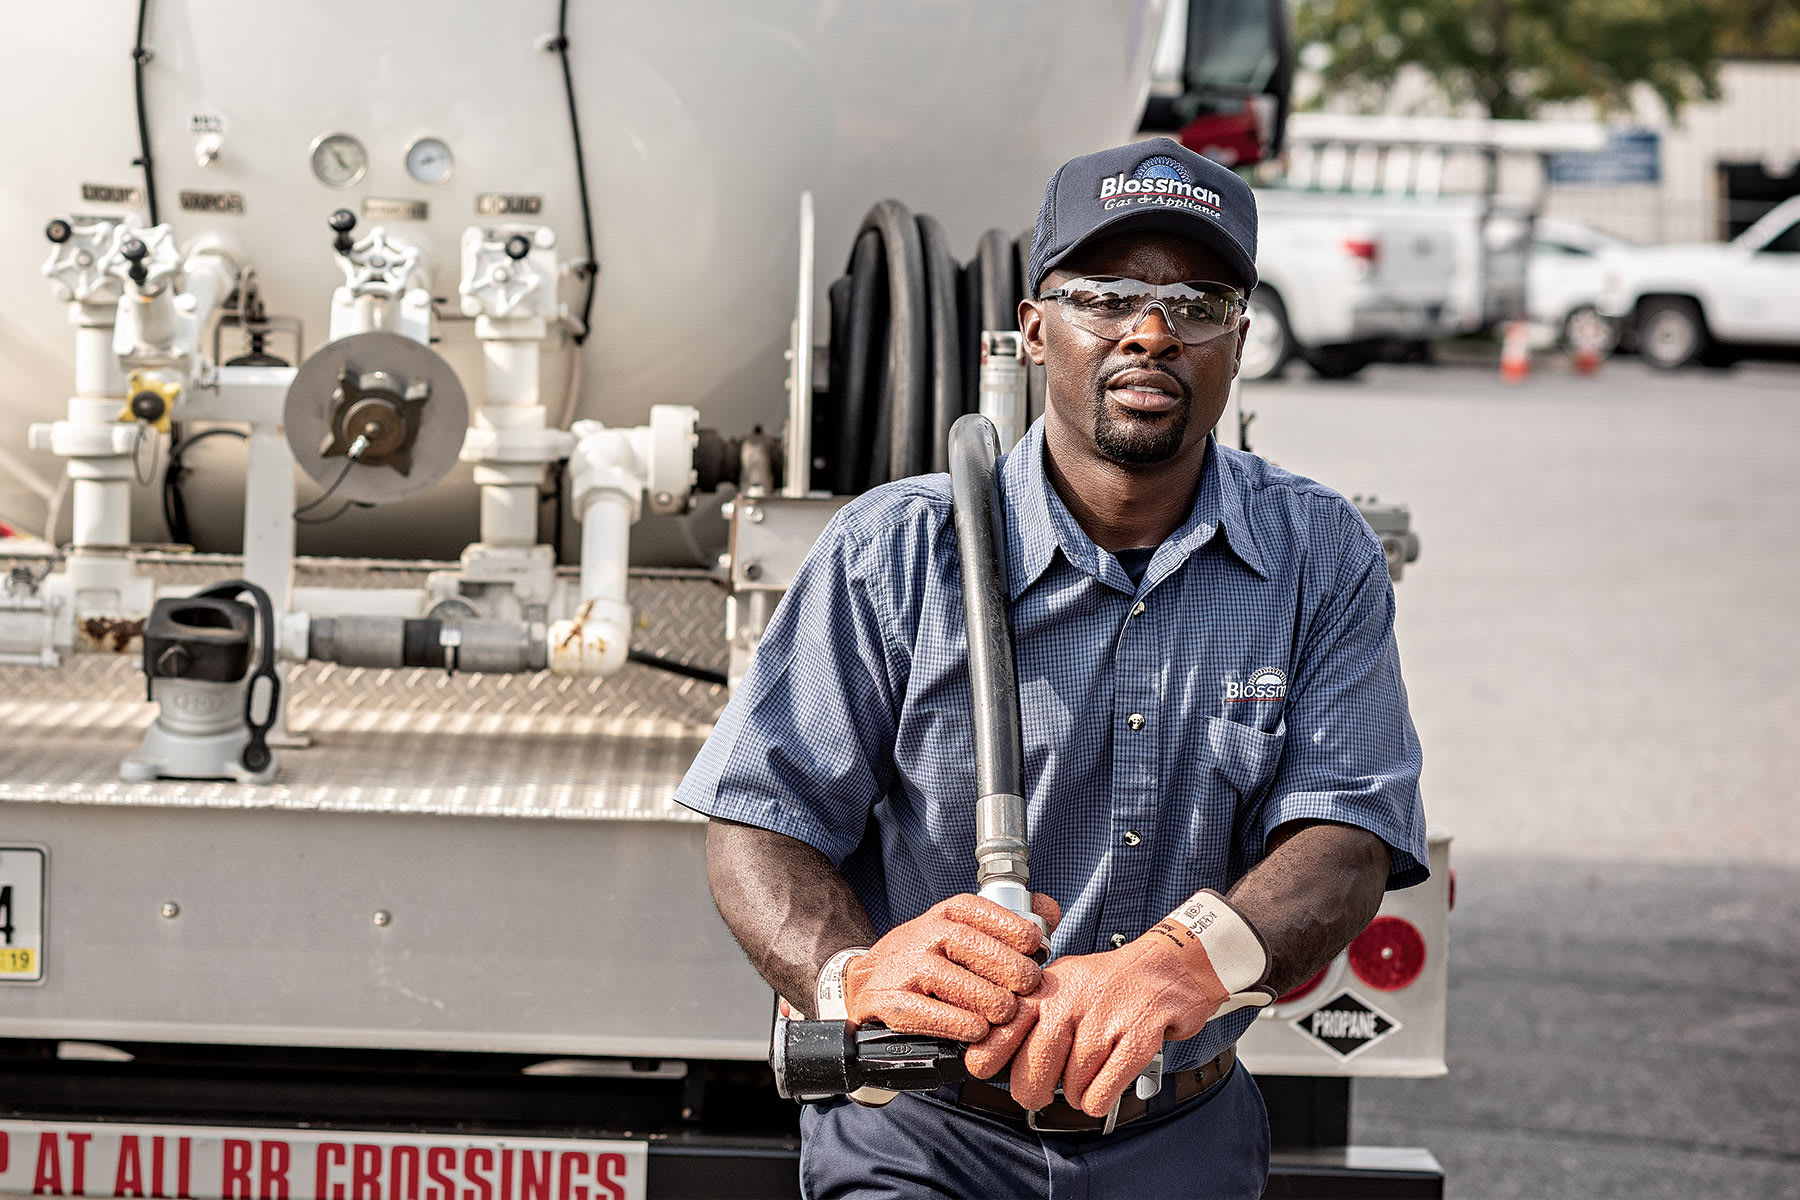 How to Handle and Work Near Propane Safely on the Job